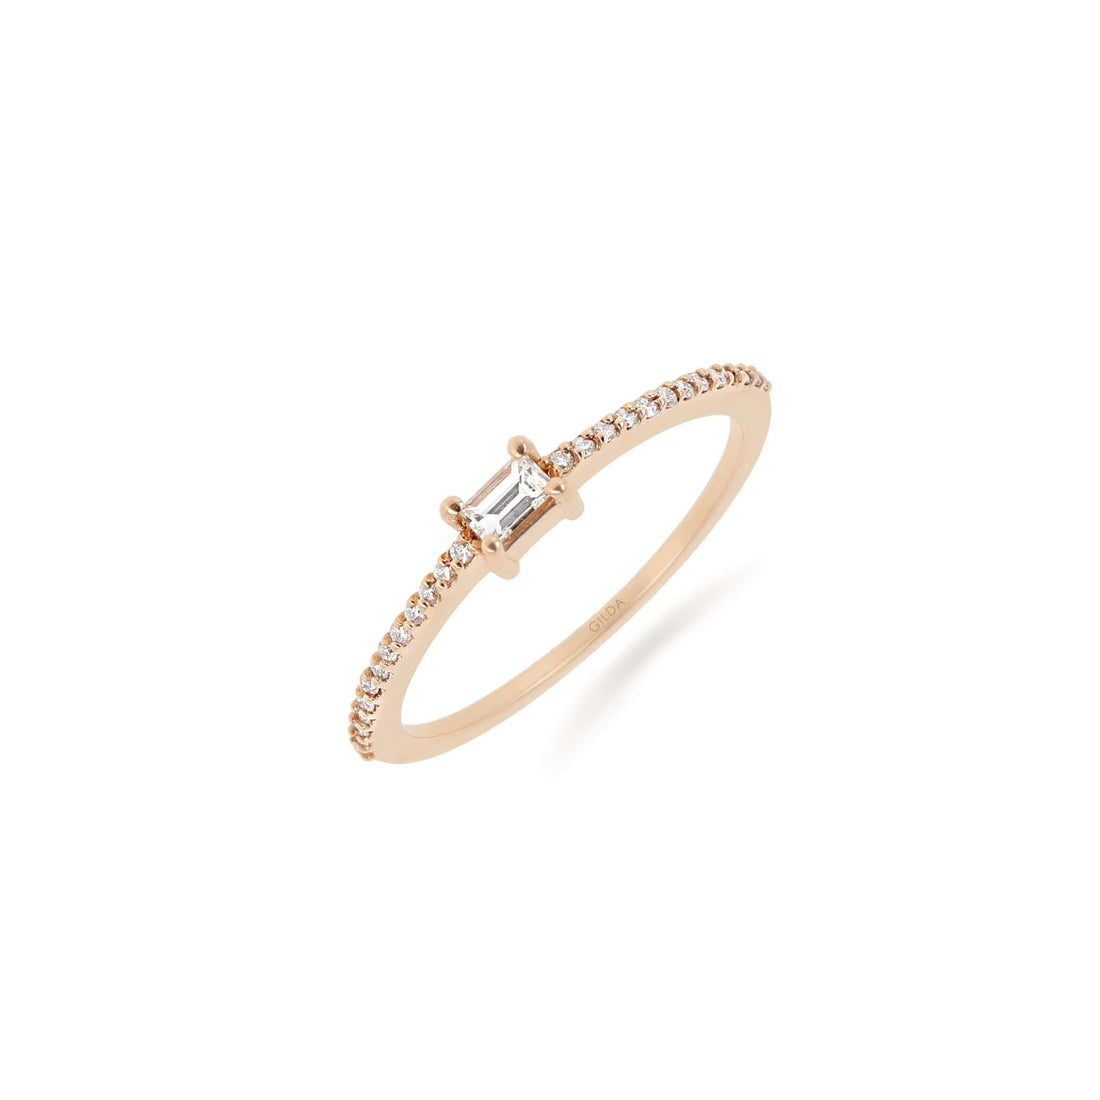 Jewelry Minnies | Diamond Ring | 0.21 Cts. | 18K Gold - ring Zengoda Shop online from Artisan Brands